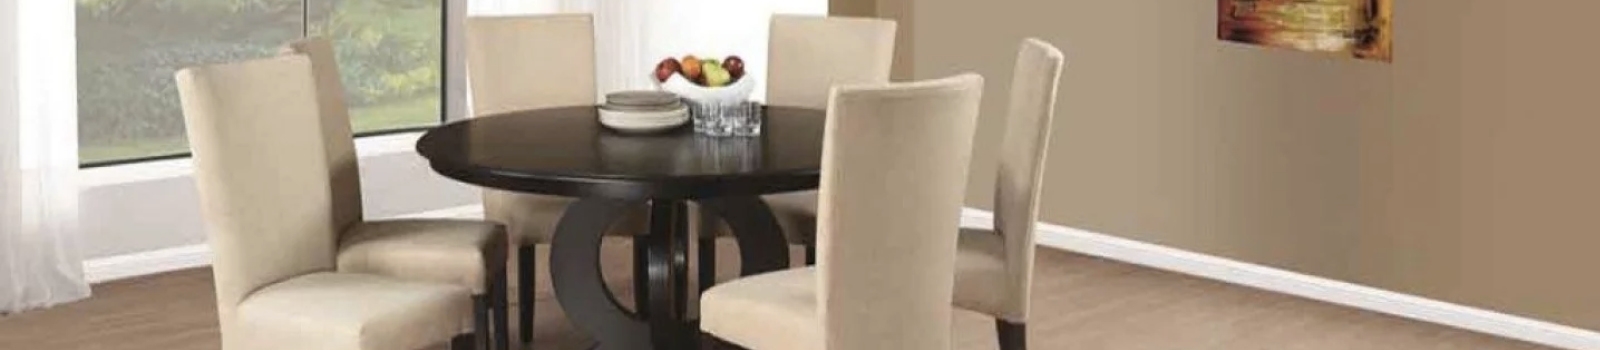 3 Rules for Choosing a Dining Room Suite - Bradlows